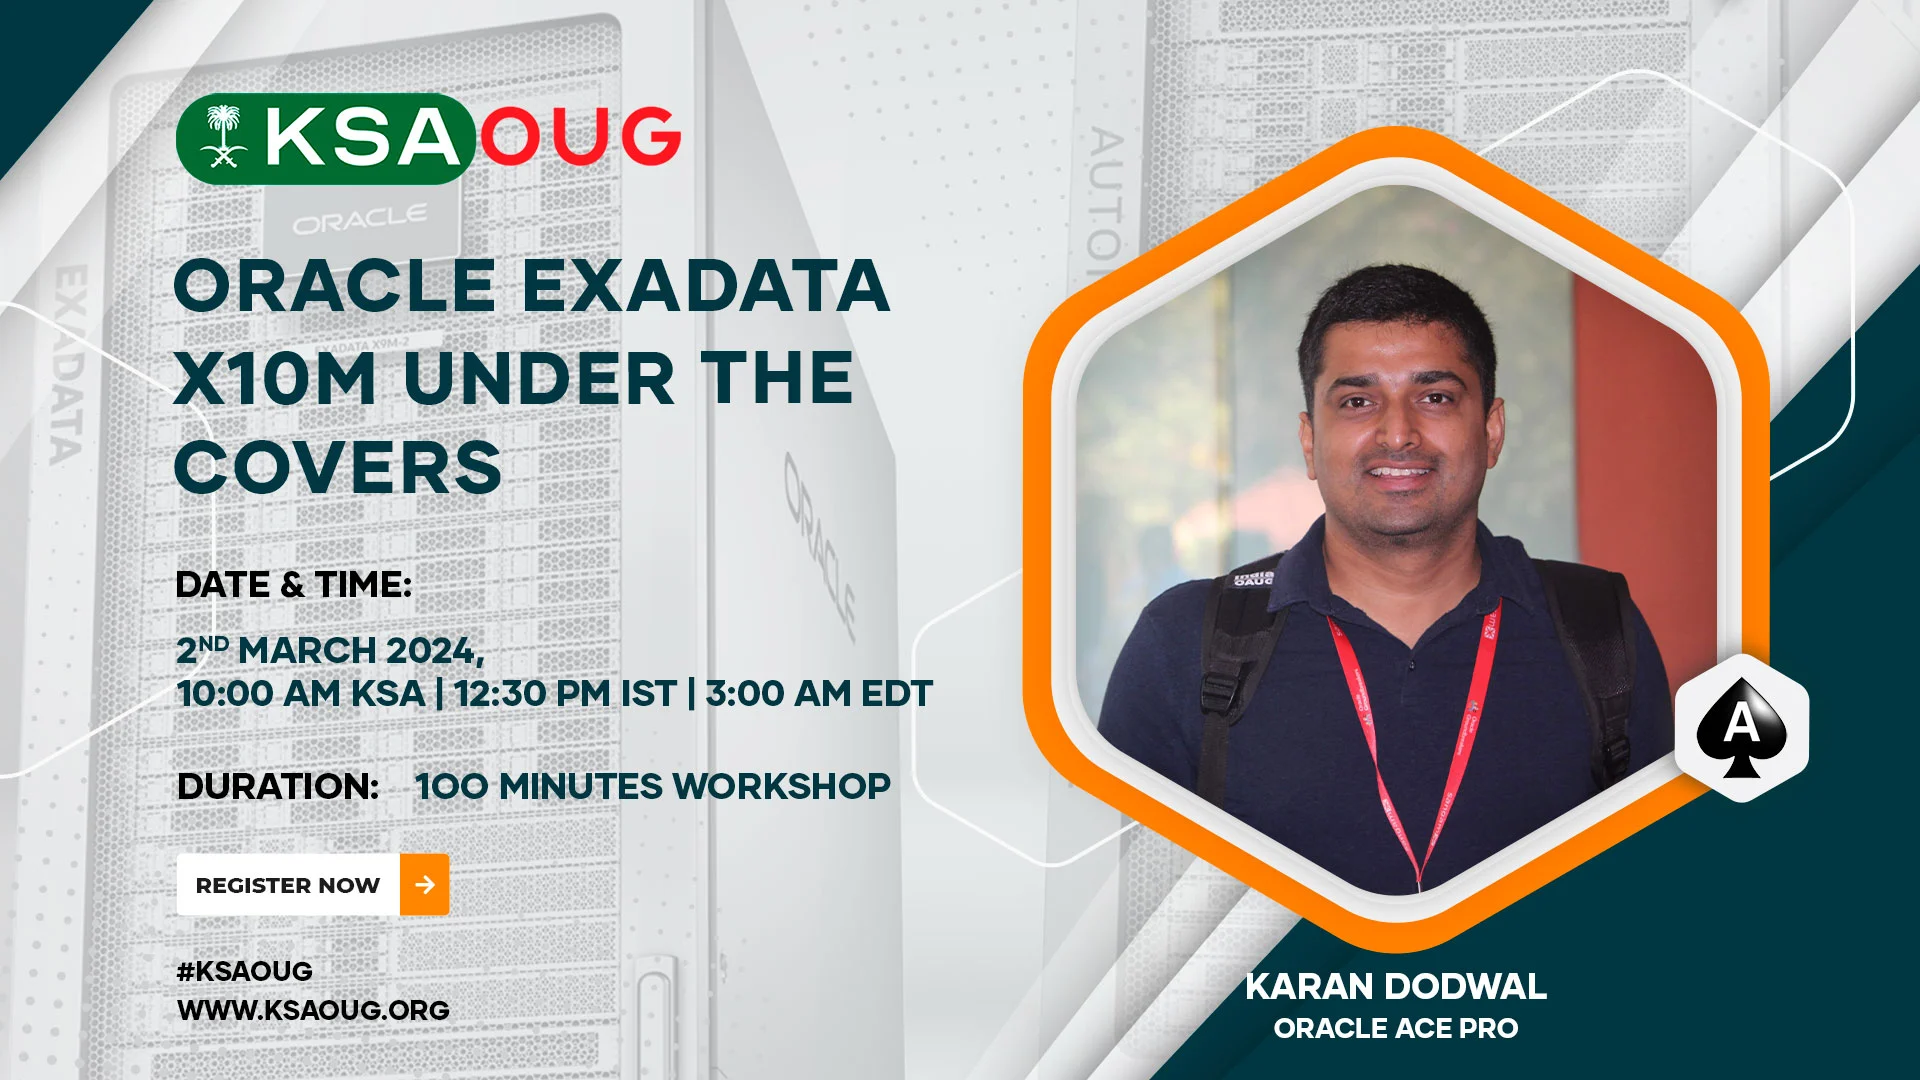 KSAOUG Connect With Karan – Oracle Exadata X10M Under the Covers